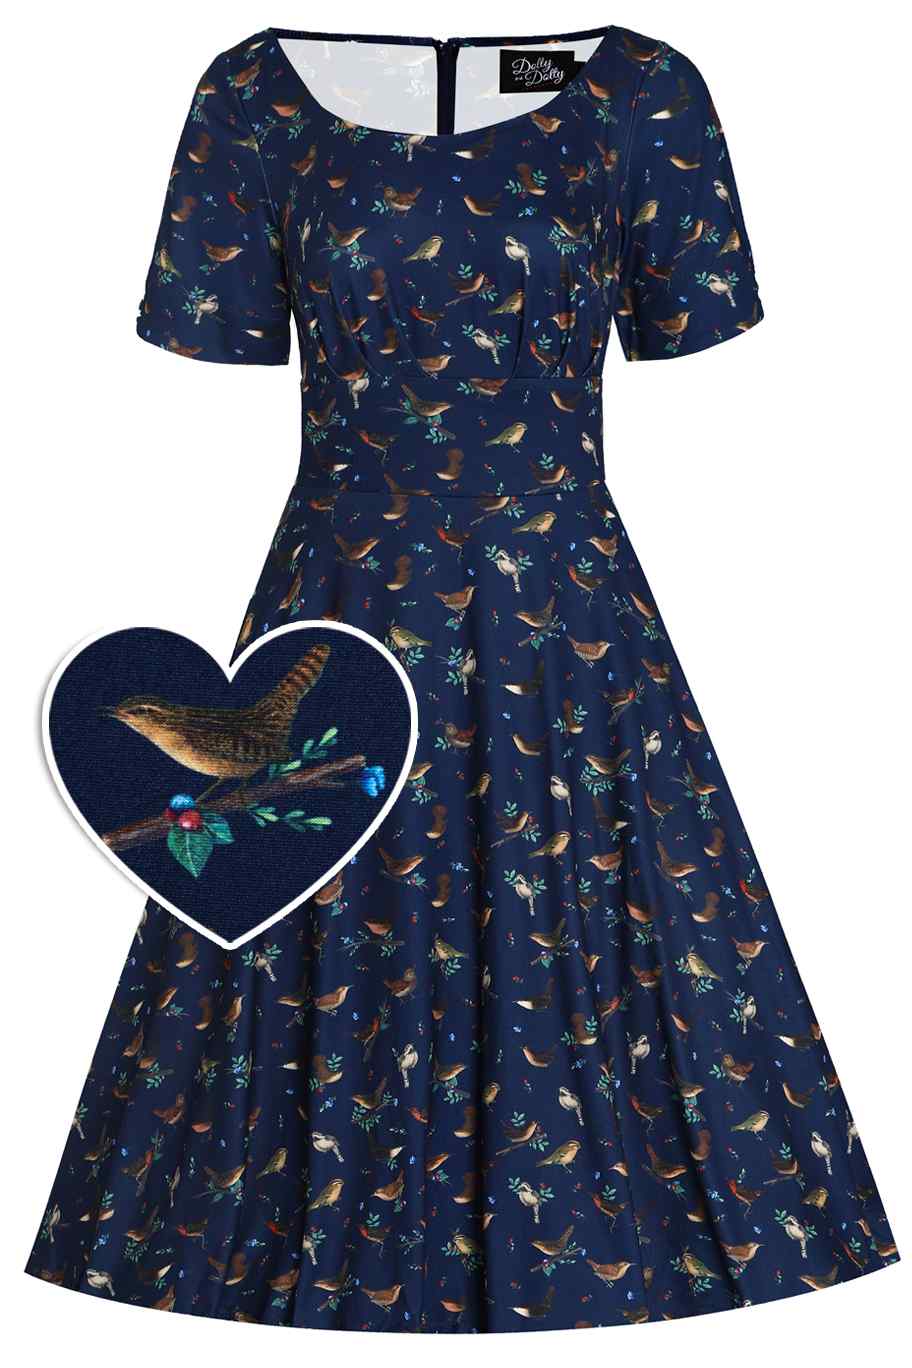 Front view of navy blue bird print sleeved swing dress